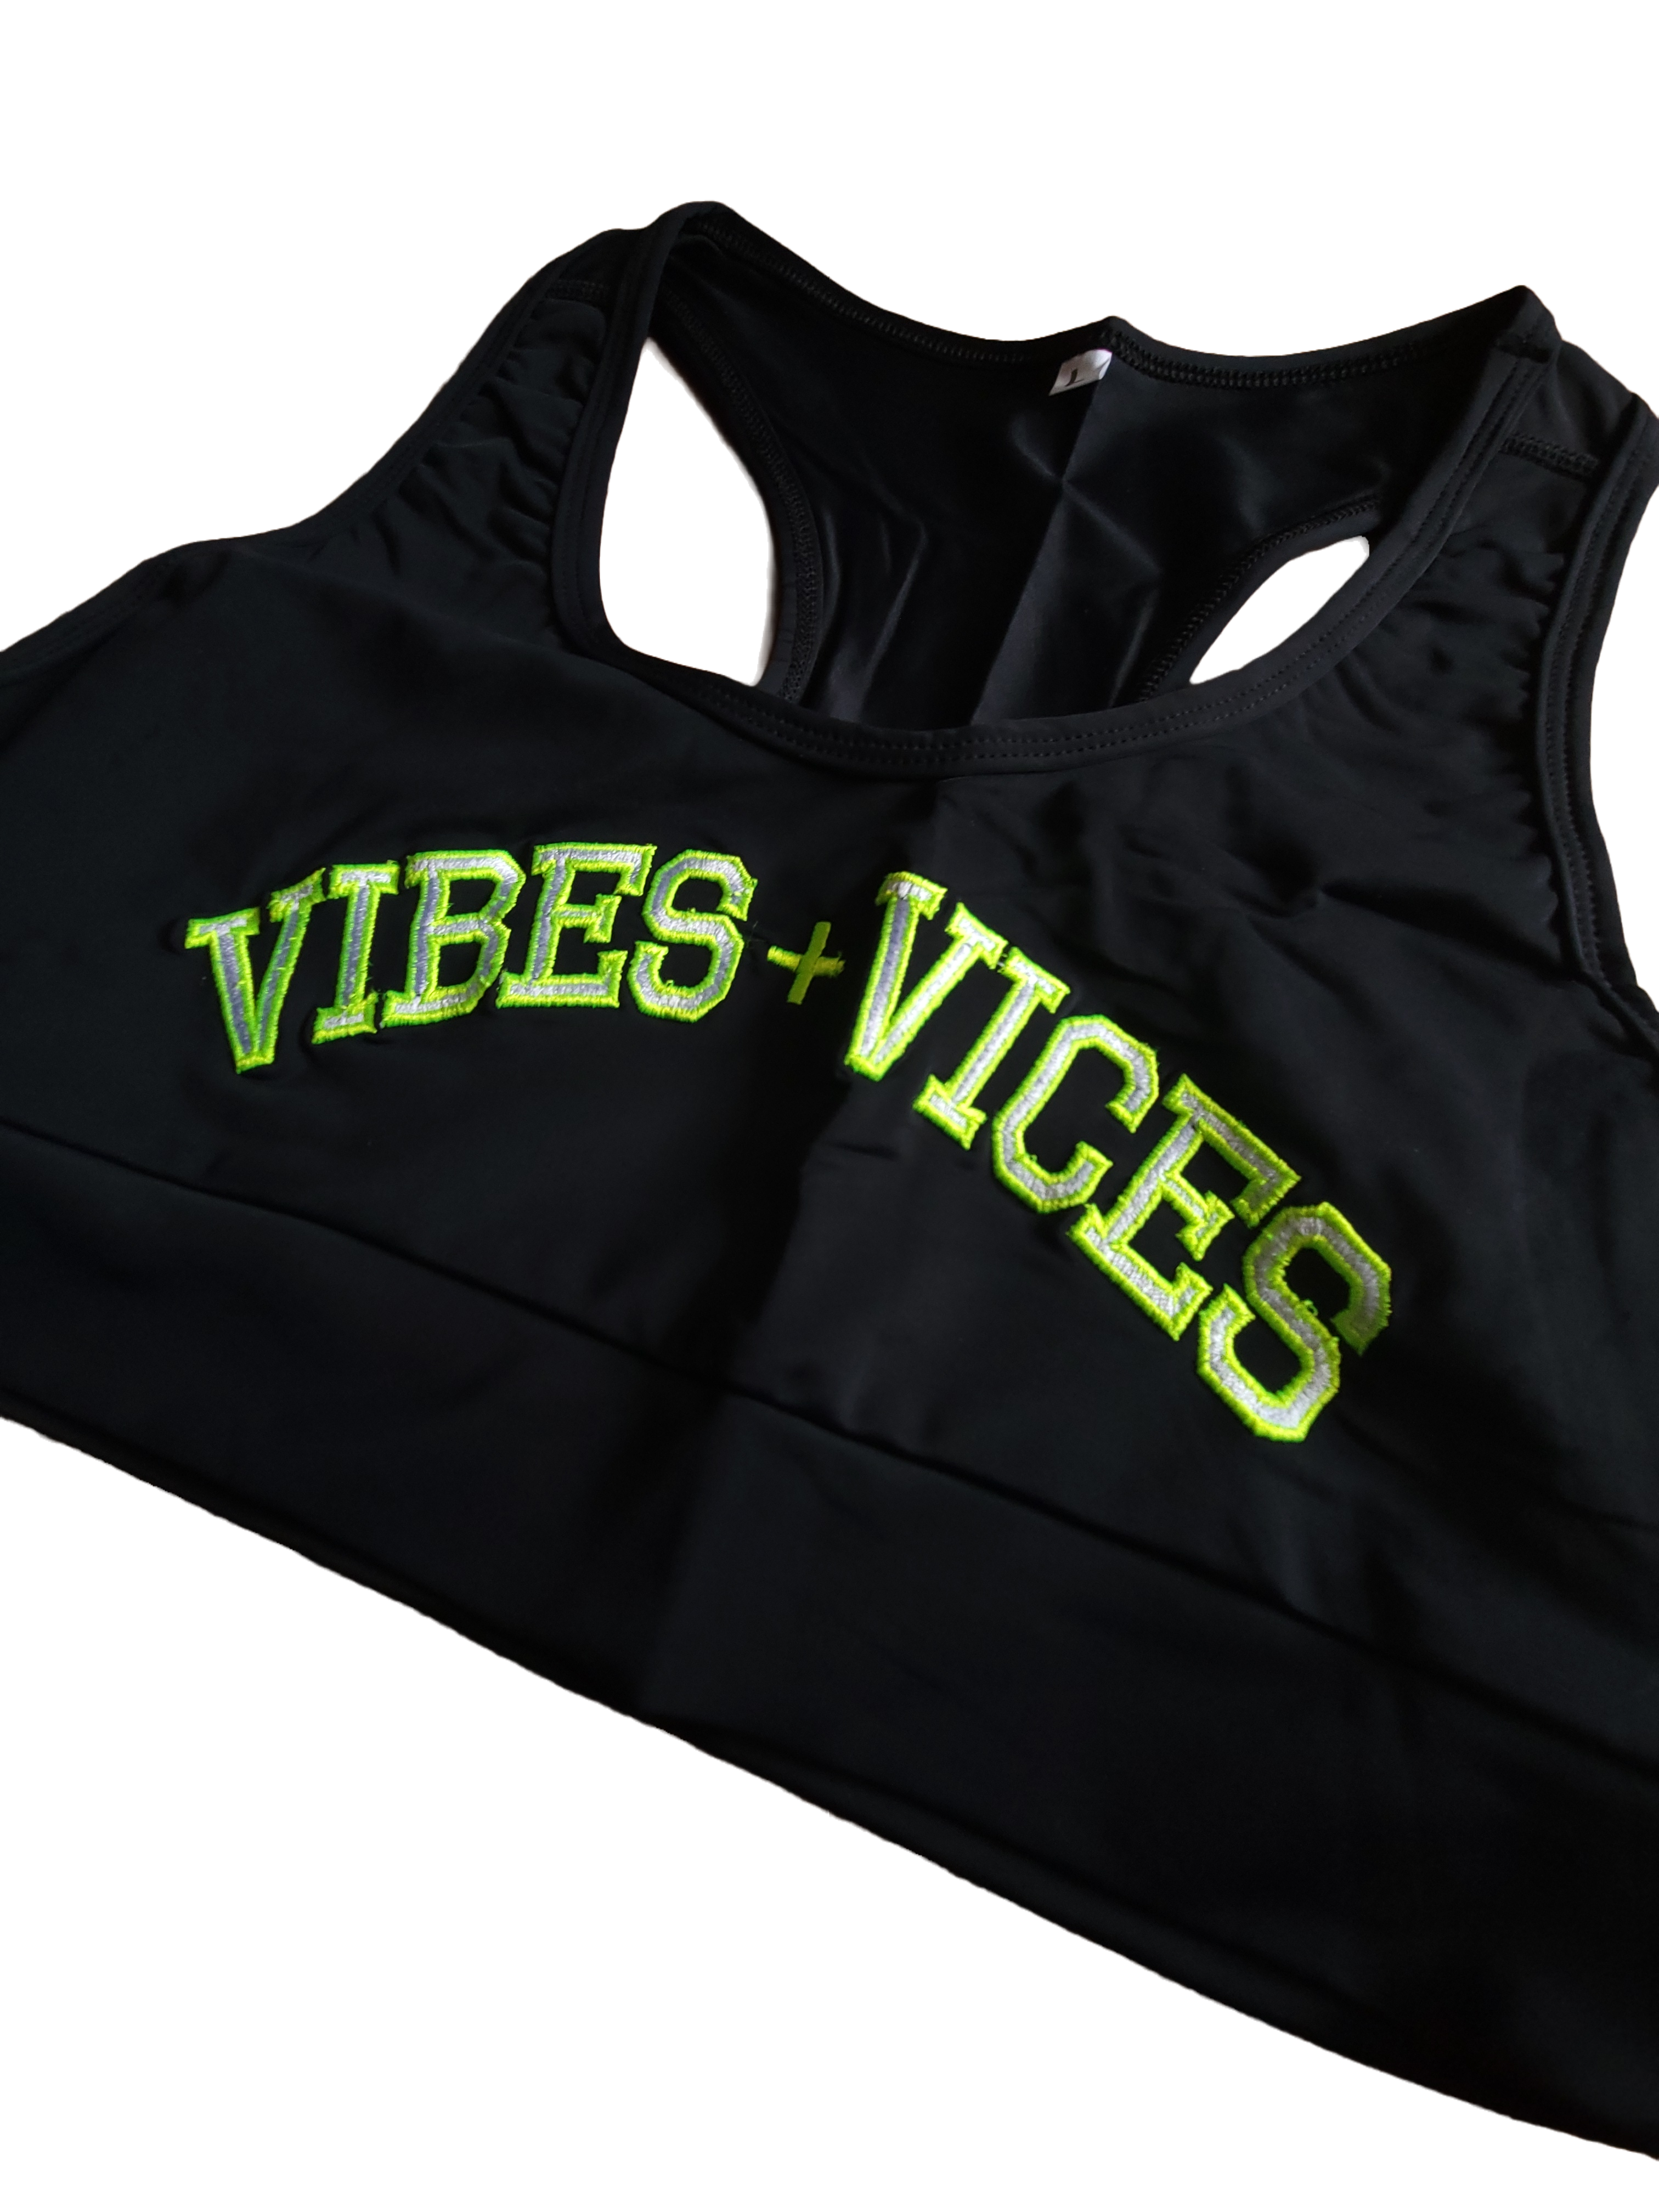 Vibes and Vices Sports Bra Sports Bra Small / Black/Neon,3X-Large / Black/Neon,2X-Large / Black/Neon,X-Large / Black/Neon,Large / Black/Neon,Medium / Black/Neon Black